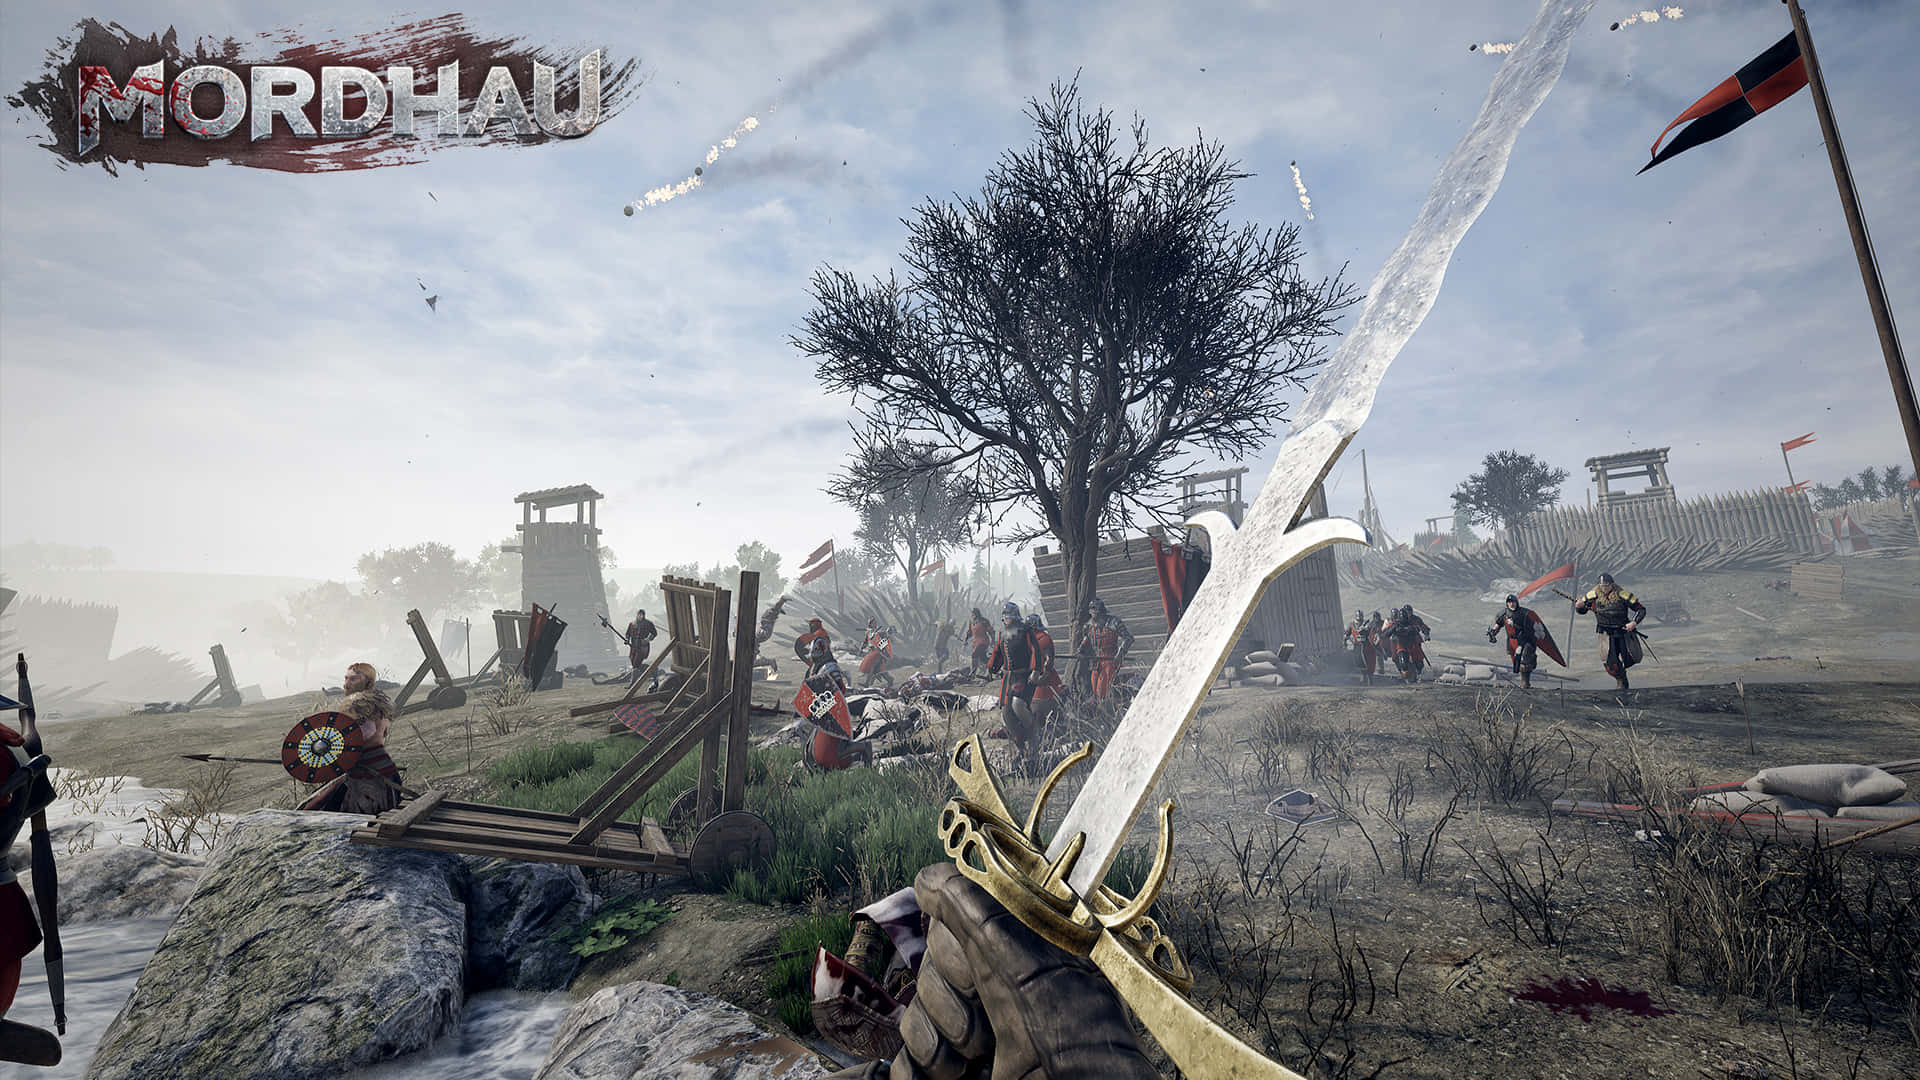 Battle your way to victory in Mordhau